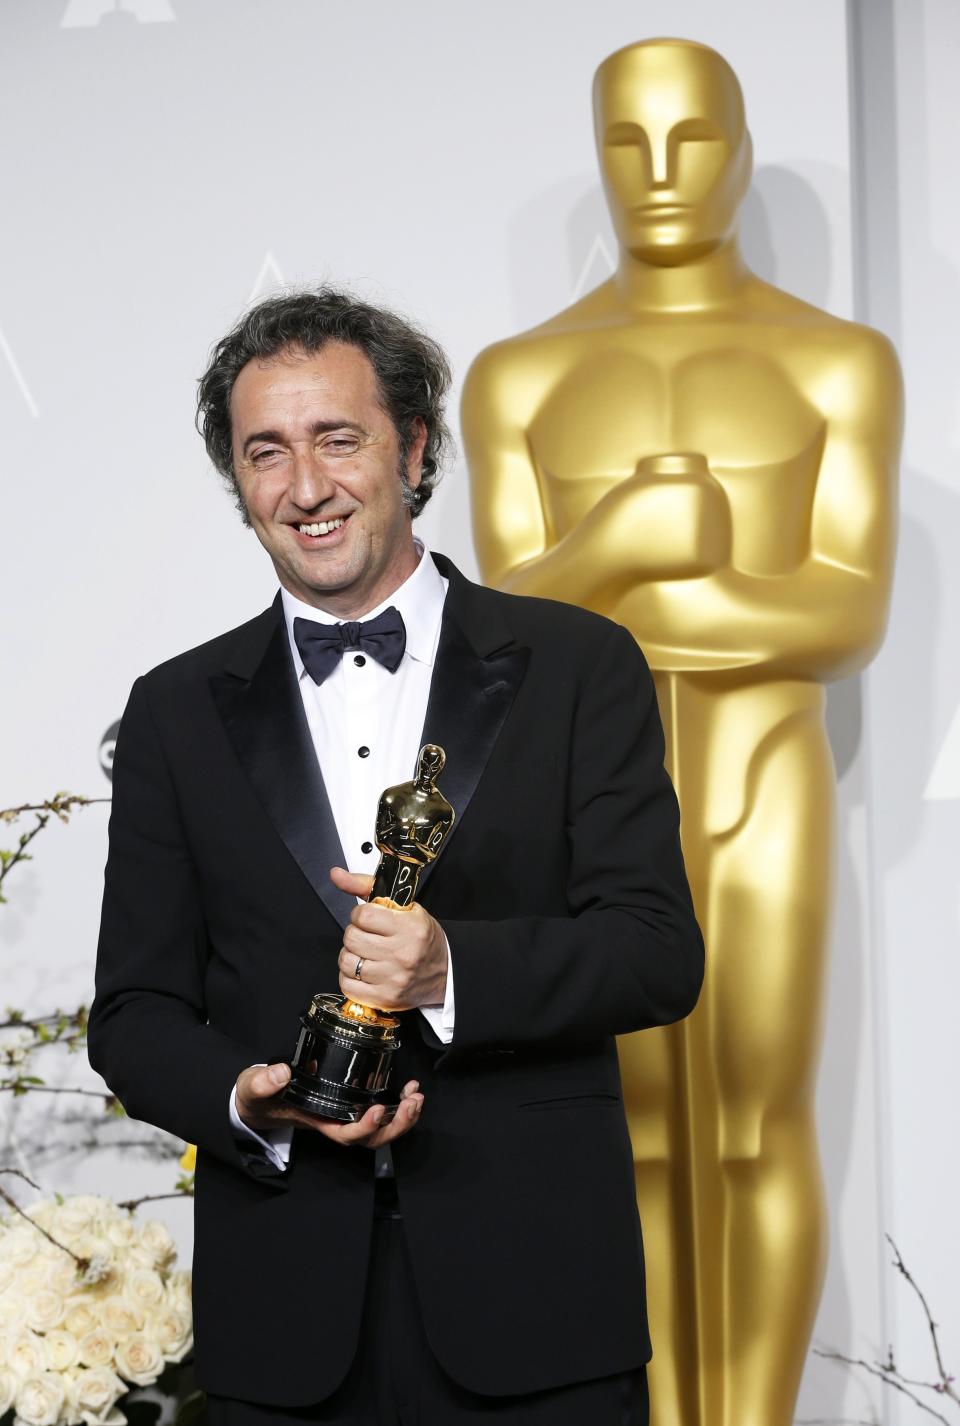 Paolo Sorrentino, director of Italian film "The Great Beauty" poses with his award for Best Foreign Language Film at the 86th Academy Awards in Hollywood on March 2, 2014. (REUTERS/Mario Anzuoni)